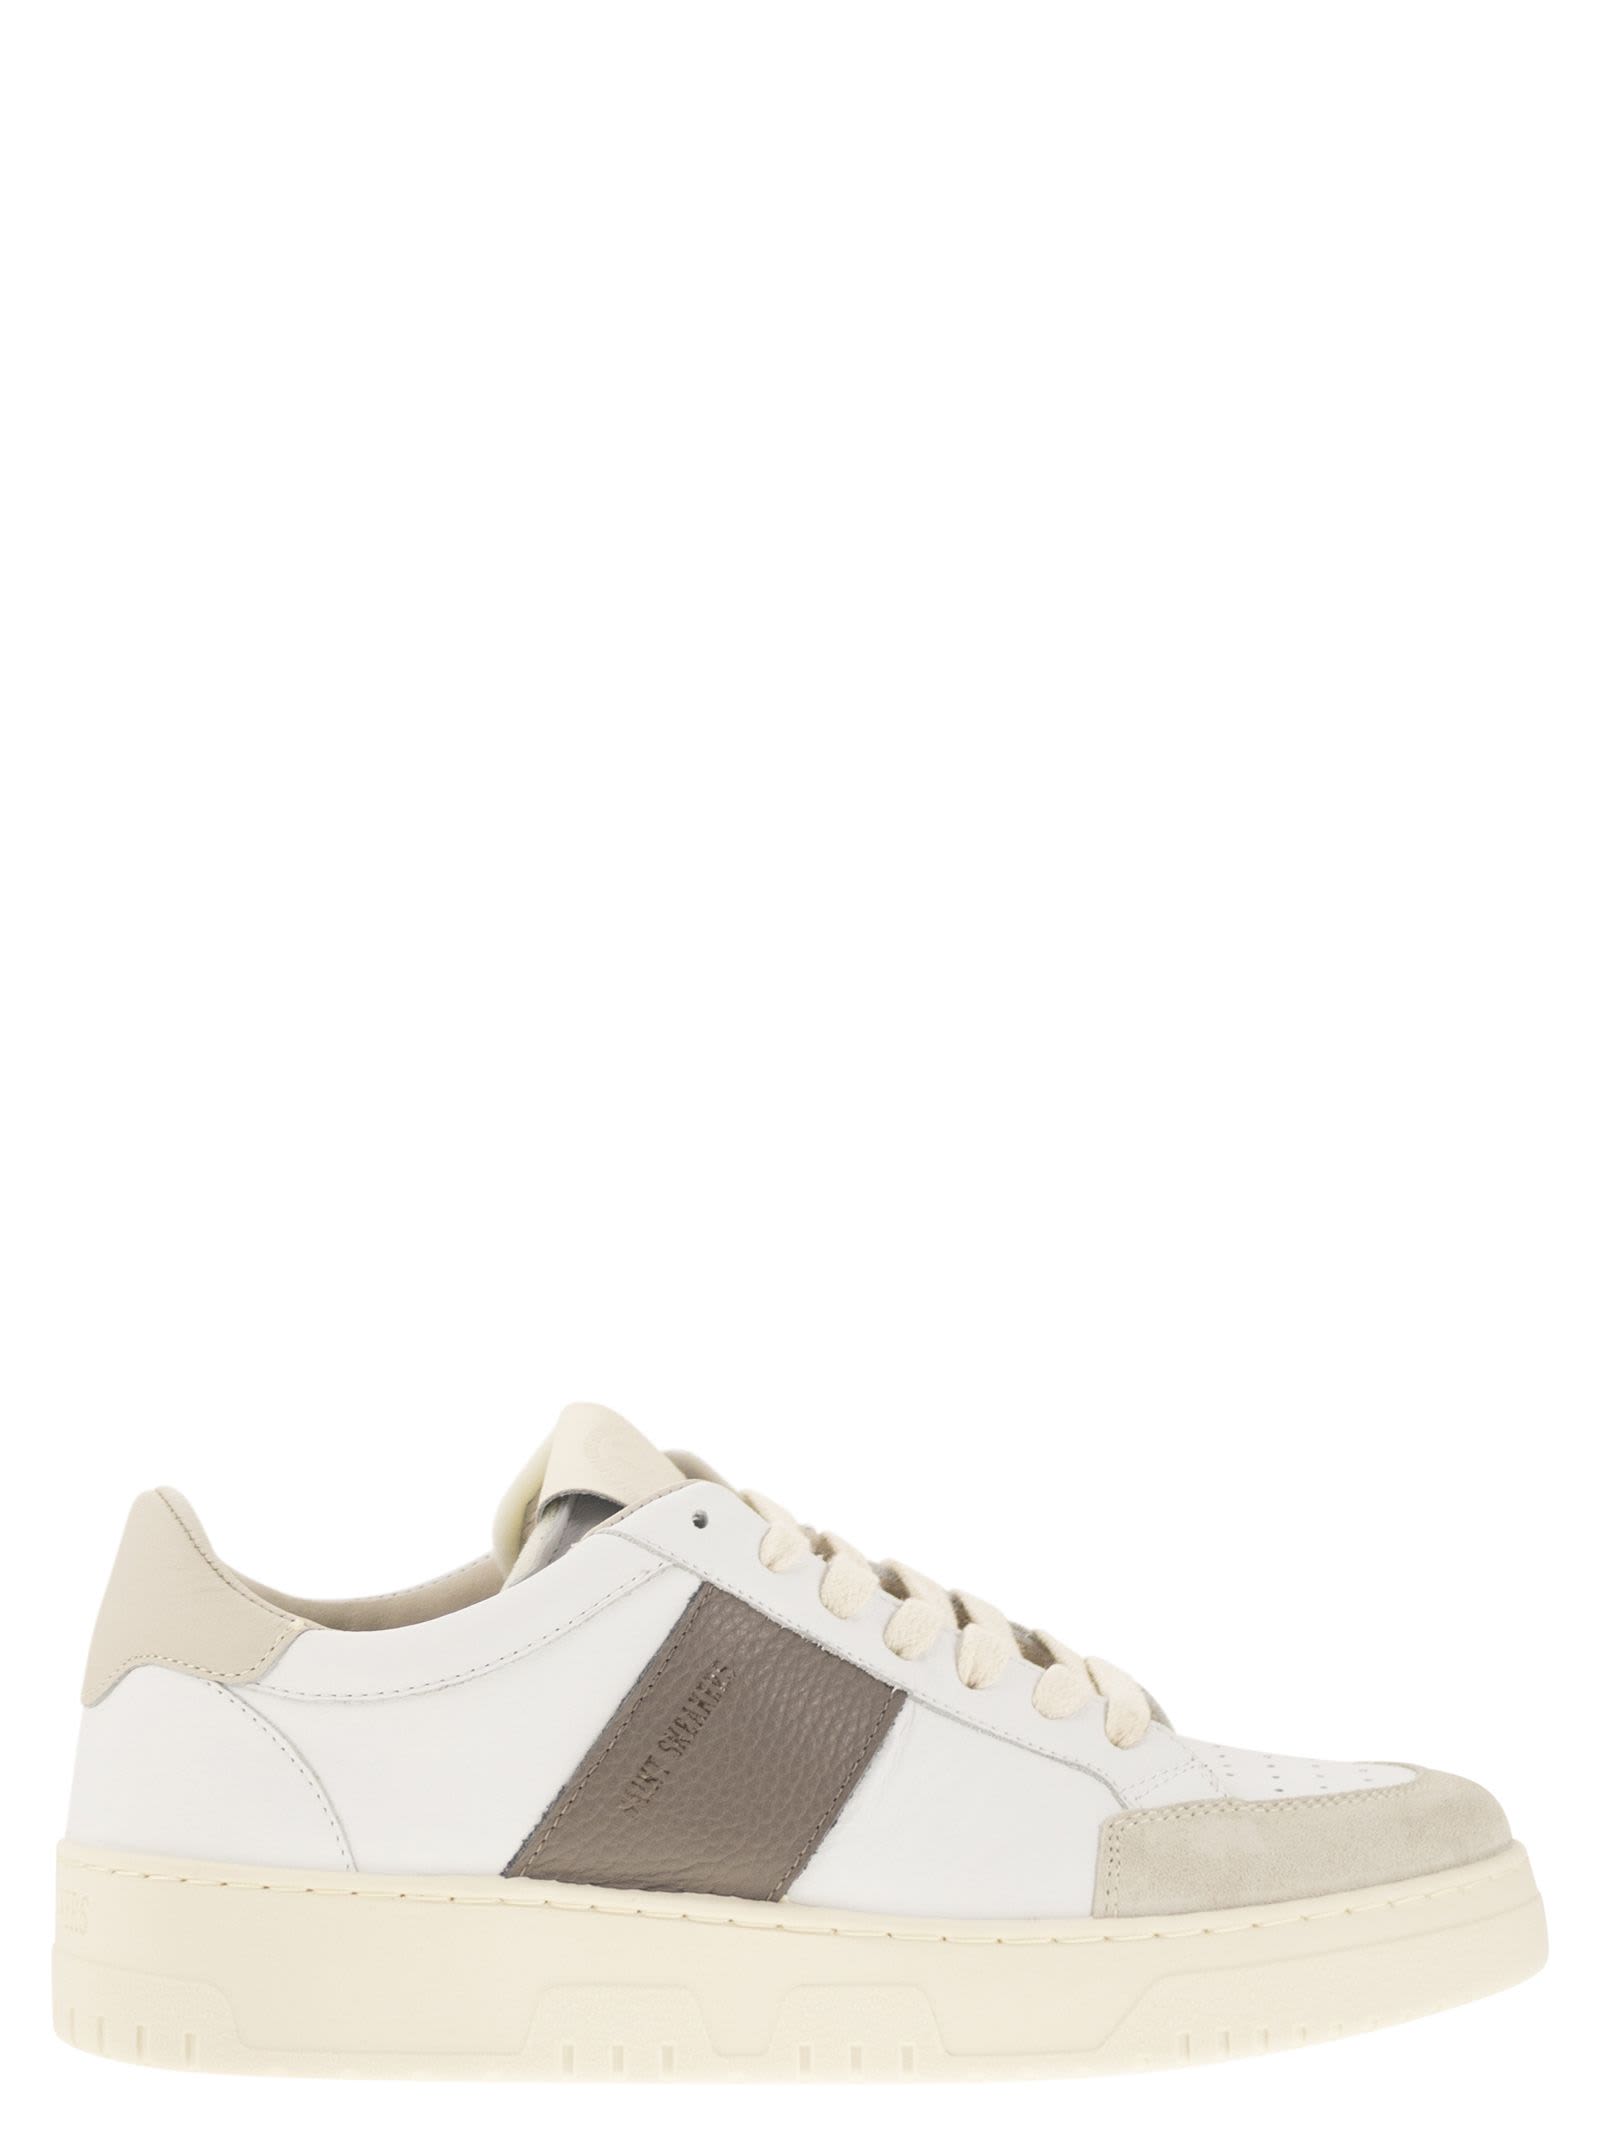 Sail - Leather And Suede Trainers